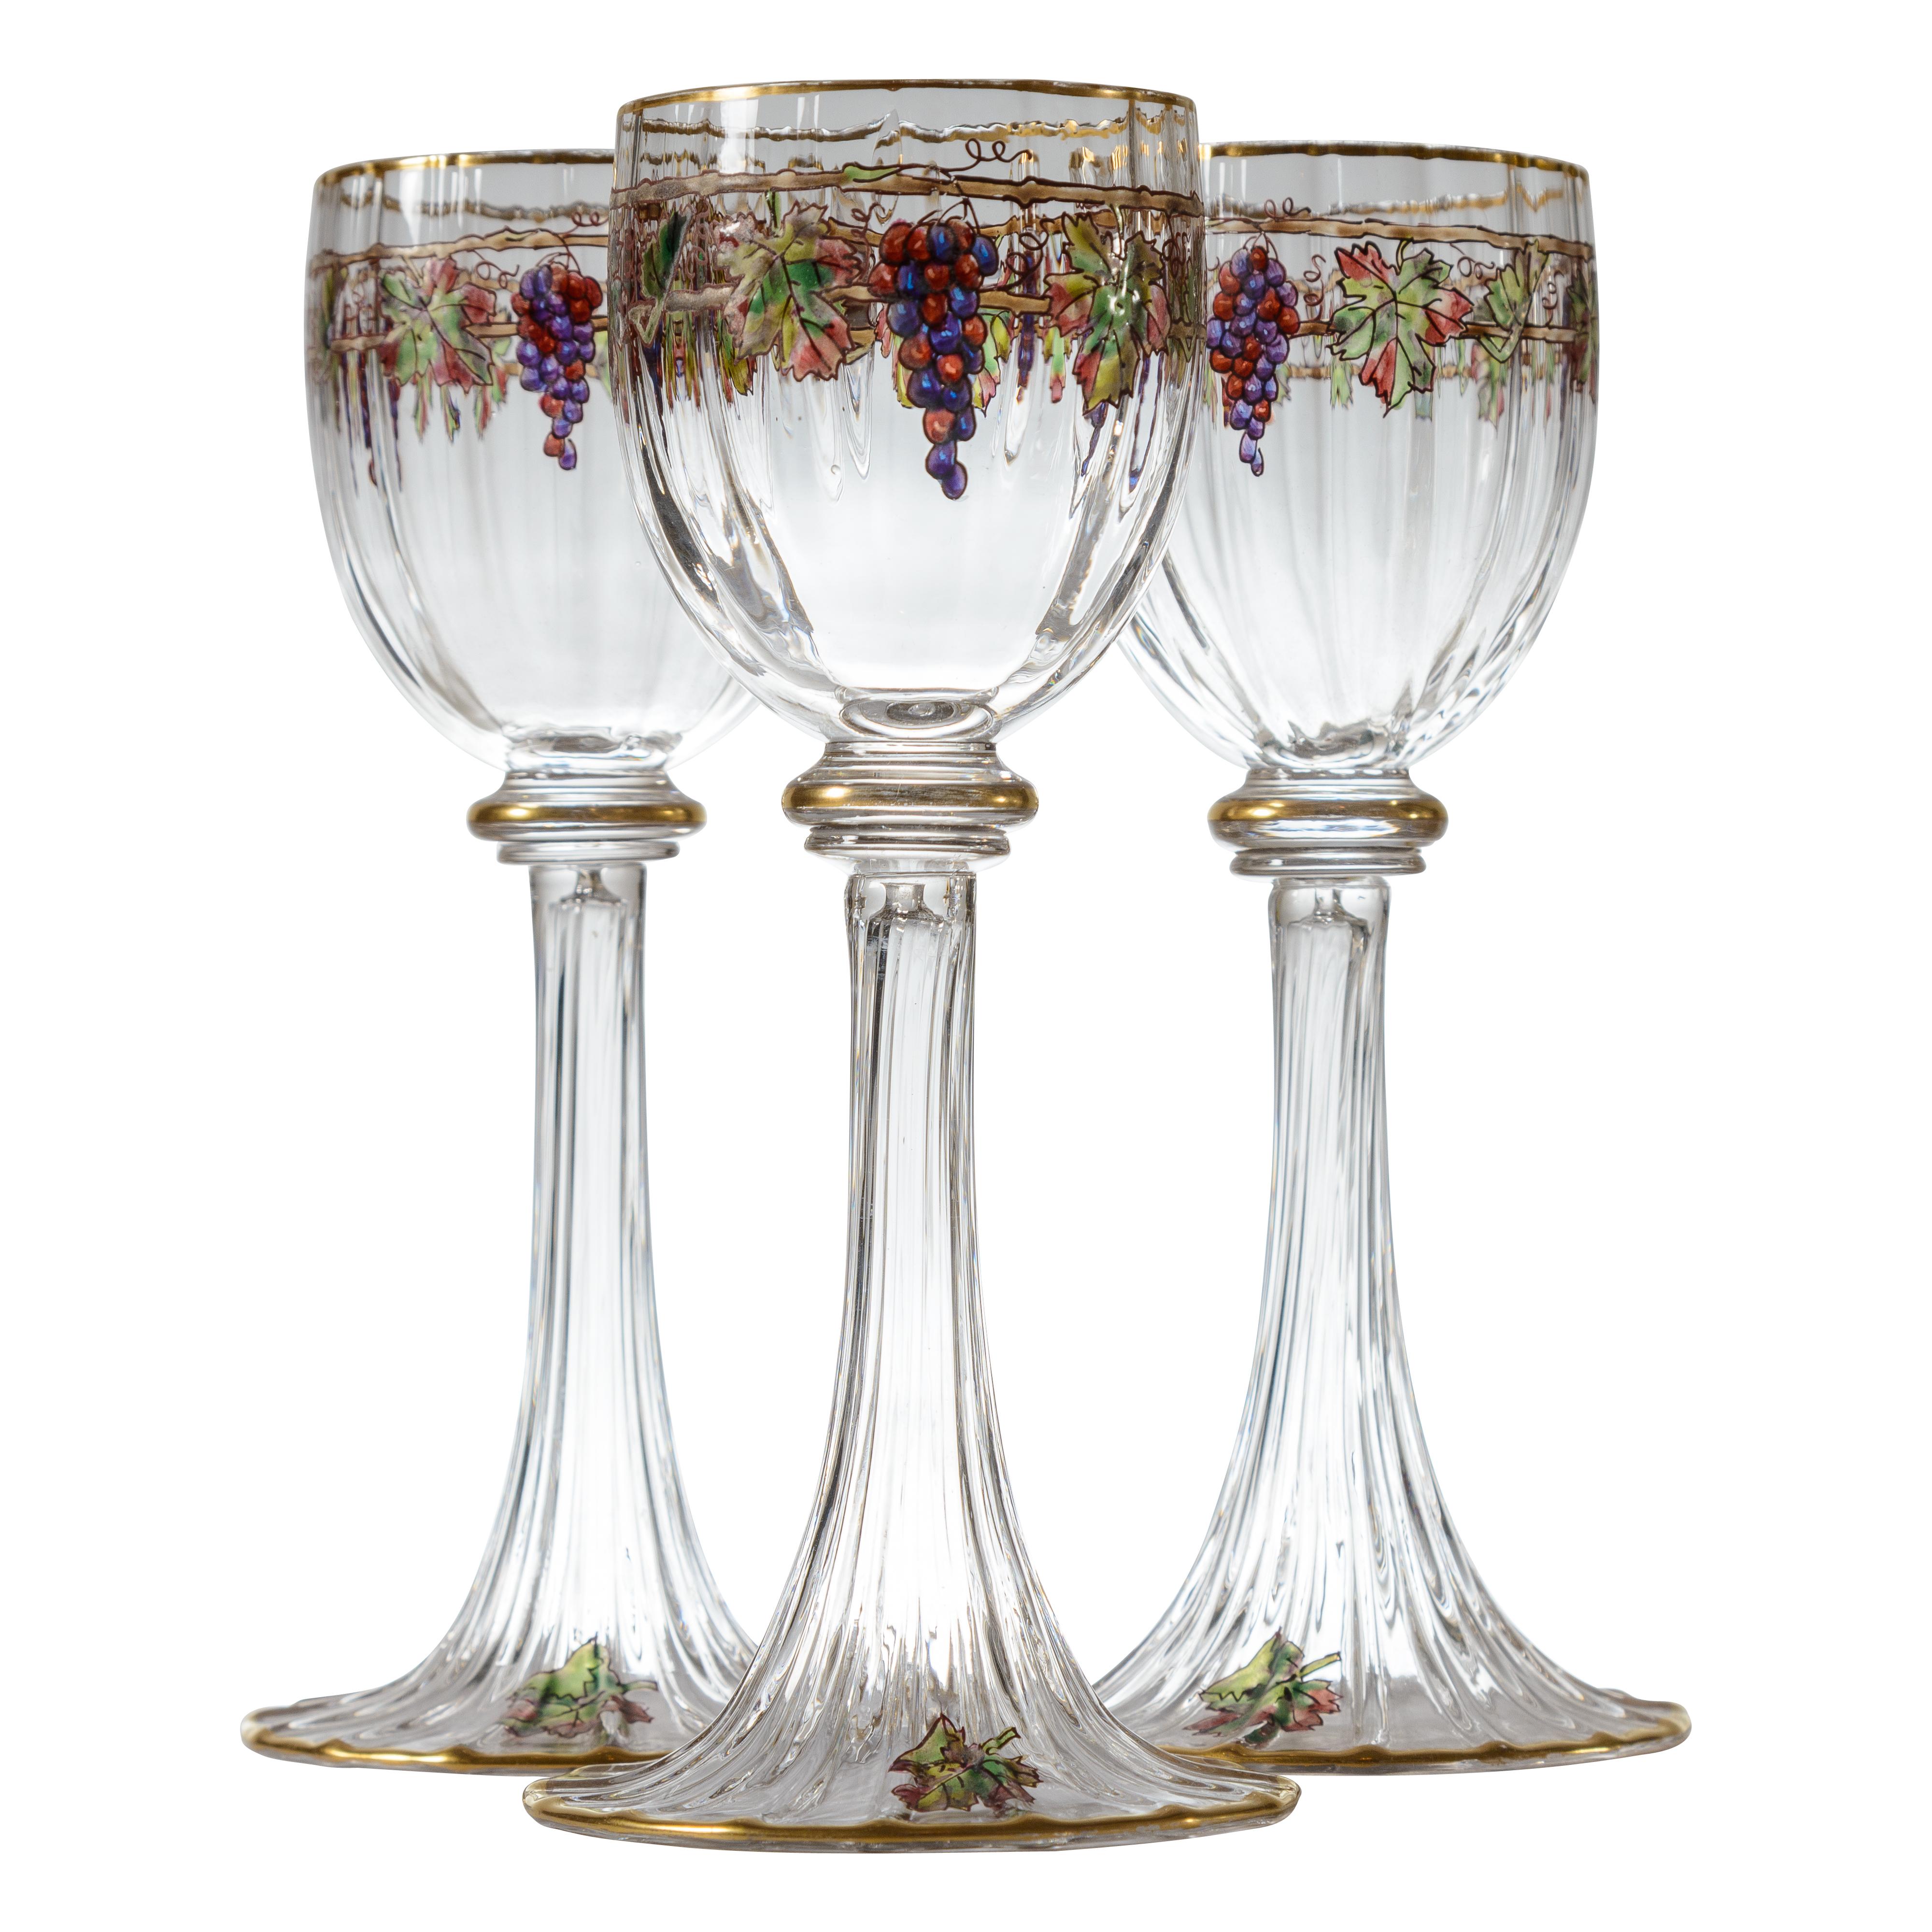 An elegant set of antique crystal wine glasses beautifully blown with an optic cut and trumpet form fluted bases. Hand enameled with purple and green grapes and vines. Trimmed on the cup, knob stem and base with 24 karat gold. Attributed to one of